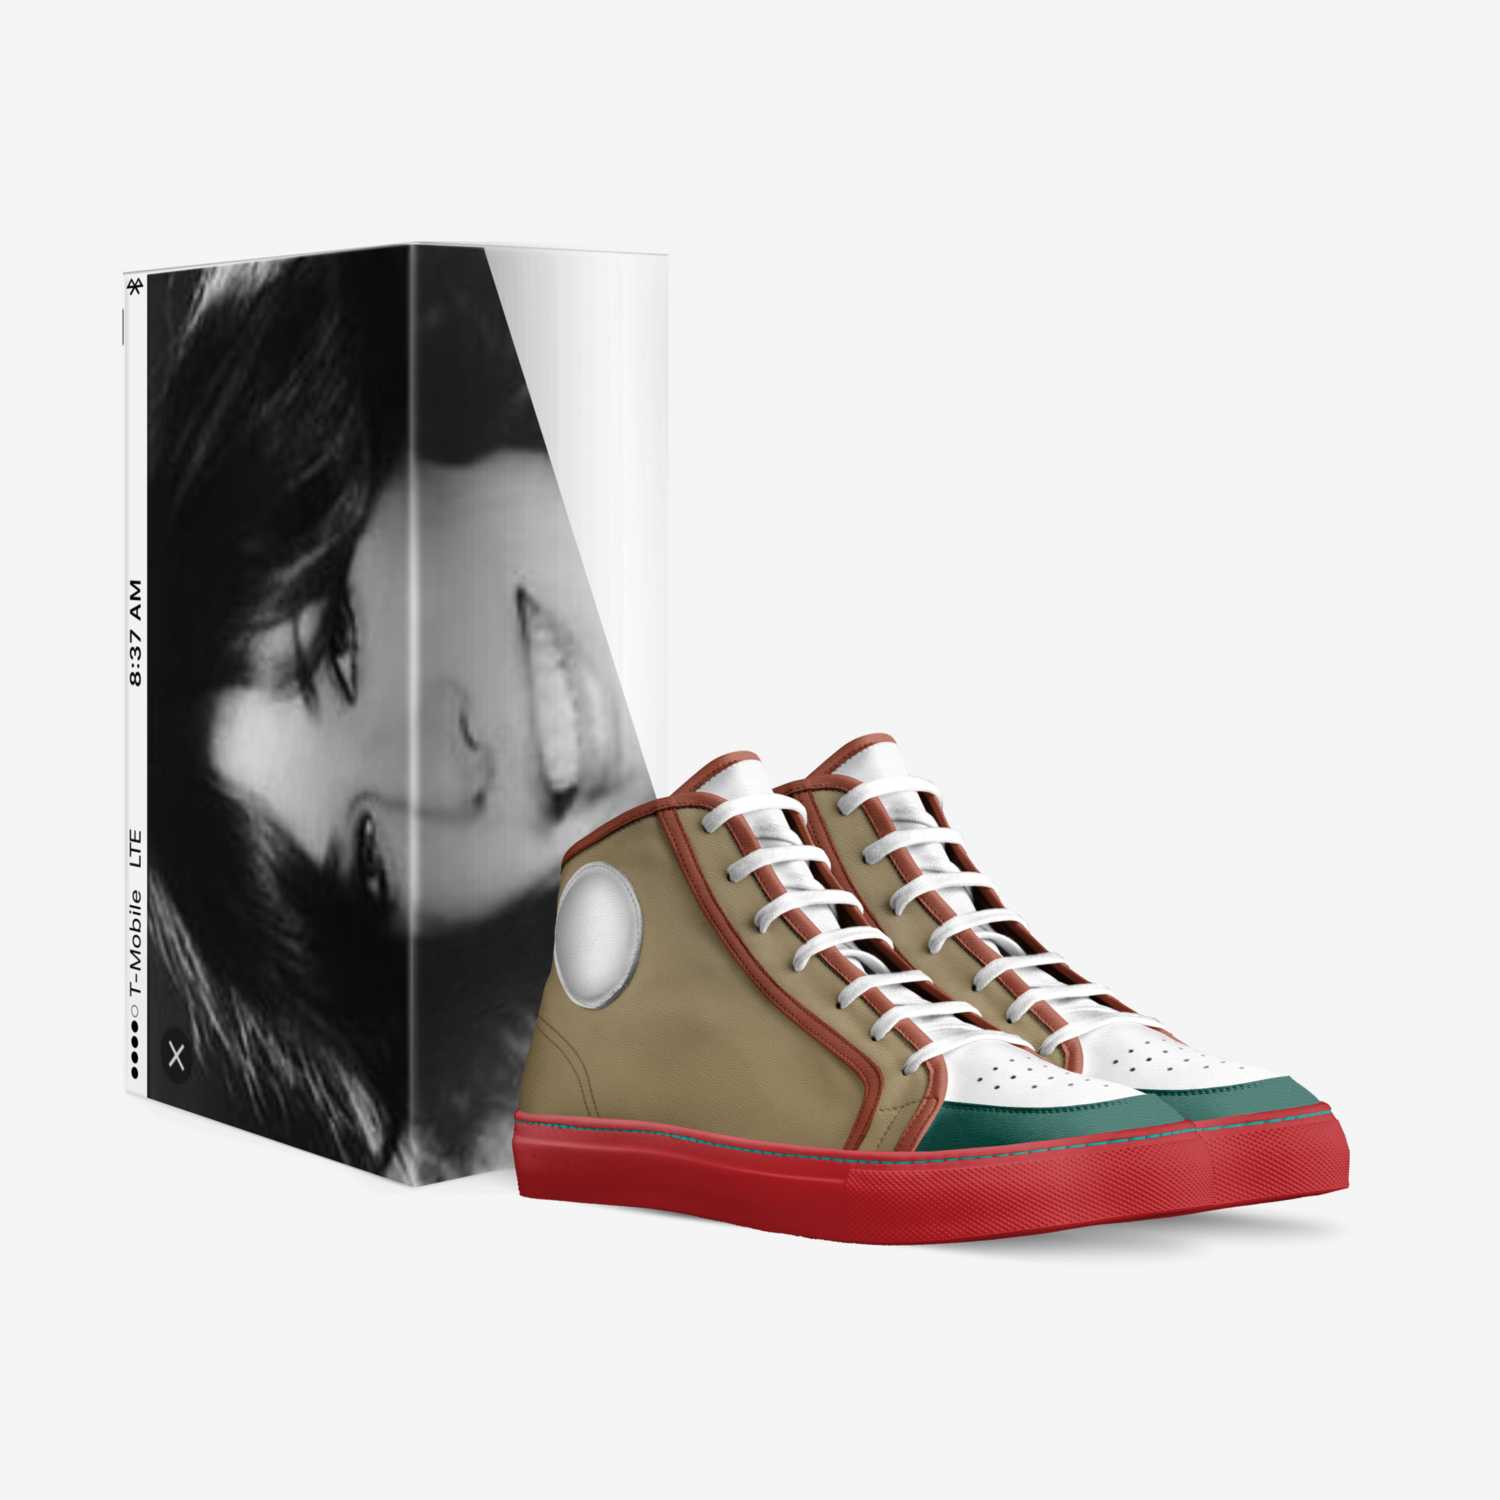 Luca custom made in Italy shoes by Luca Gualco | Box view